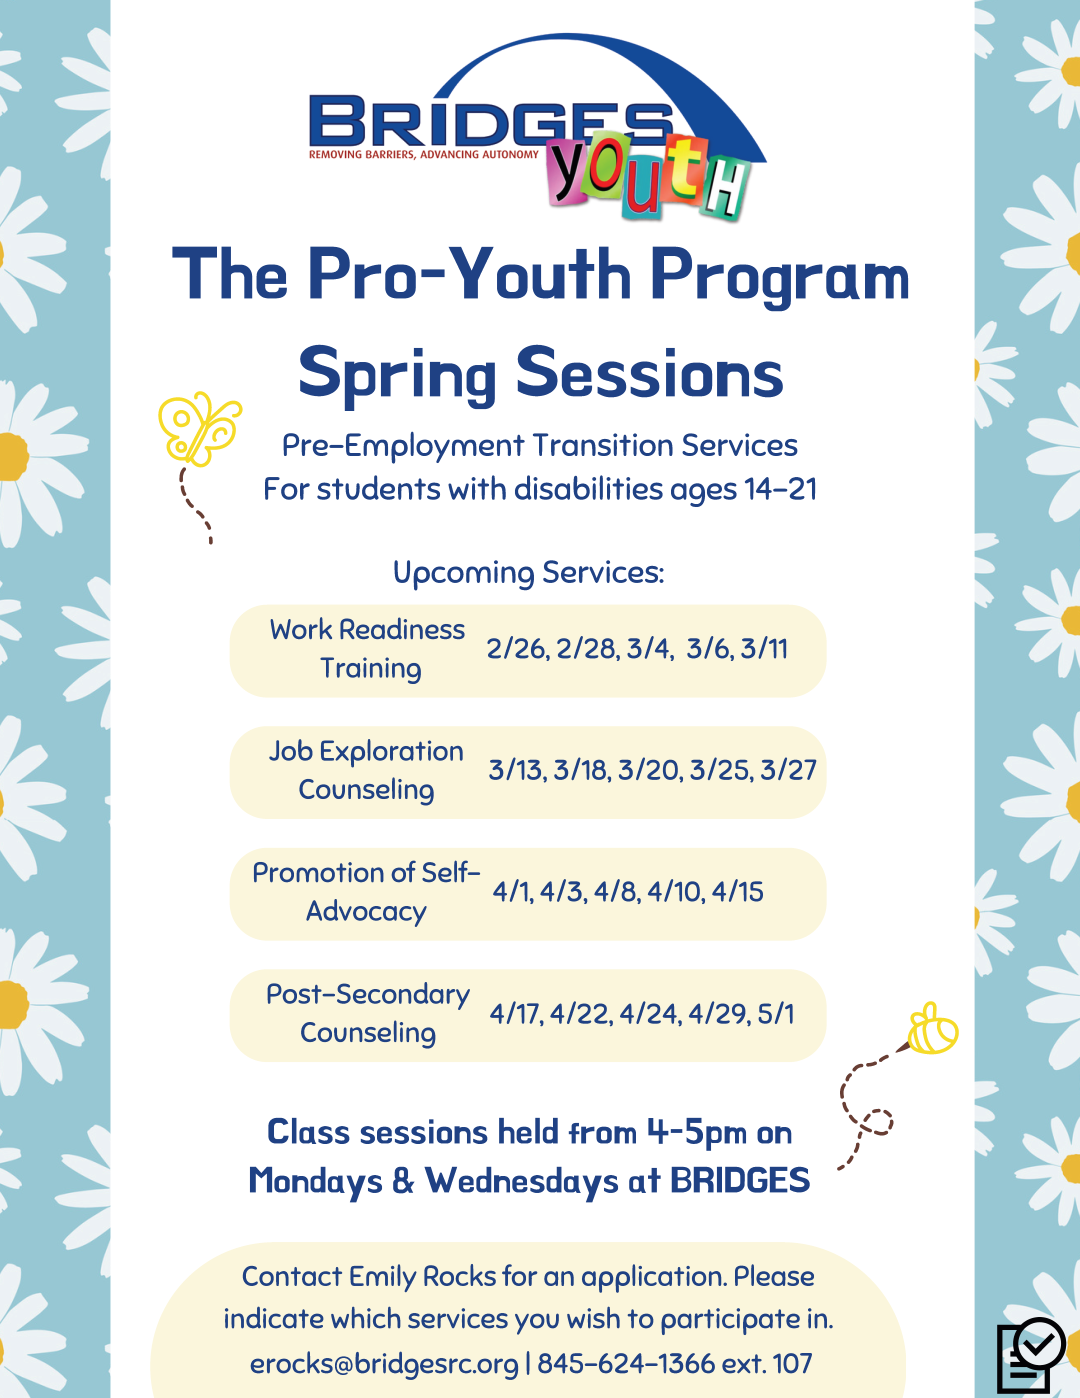 The Pro-Youth Program Spring Sessions, Pre-Employment Transition Services for students with disabilities ages 14 to 21. Upcoming Services: Work Readiness Training, February 26 and 28, March 4, 6, and 11. Job Exploration Counseling, March 13, 18, 20, 25 and 27. Promotion of Self Advocacy, April 1, 3, 8, 10, and 15. Post-Secondary Counseling, April 17, 22, 24, 29, and May 1. Class sessions held from 4 to 5 P-M on Mondays and Wednesdays at Bridges. Contact Emily Rocks for an application. Please indicate which services you wish to participate in. ERocks@BridgesRC.org | 845-624-1366 Extension 107.